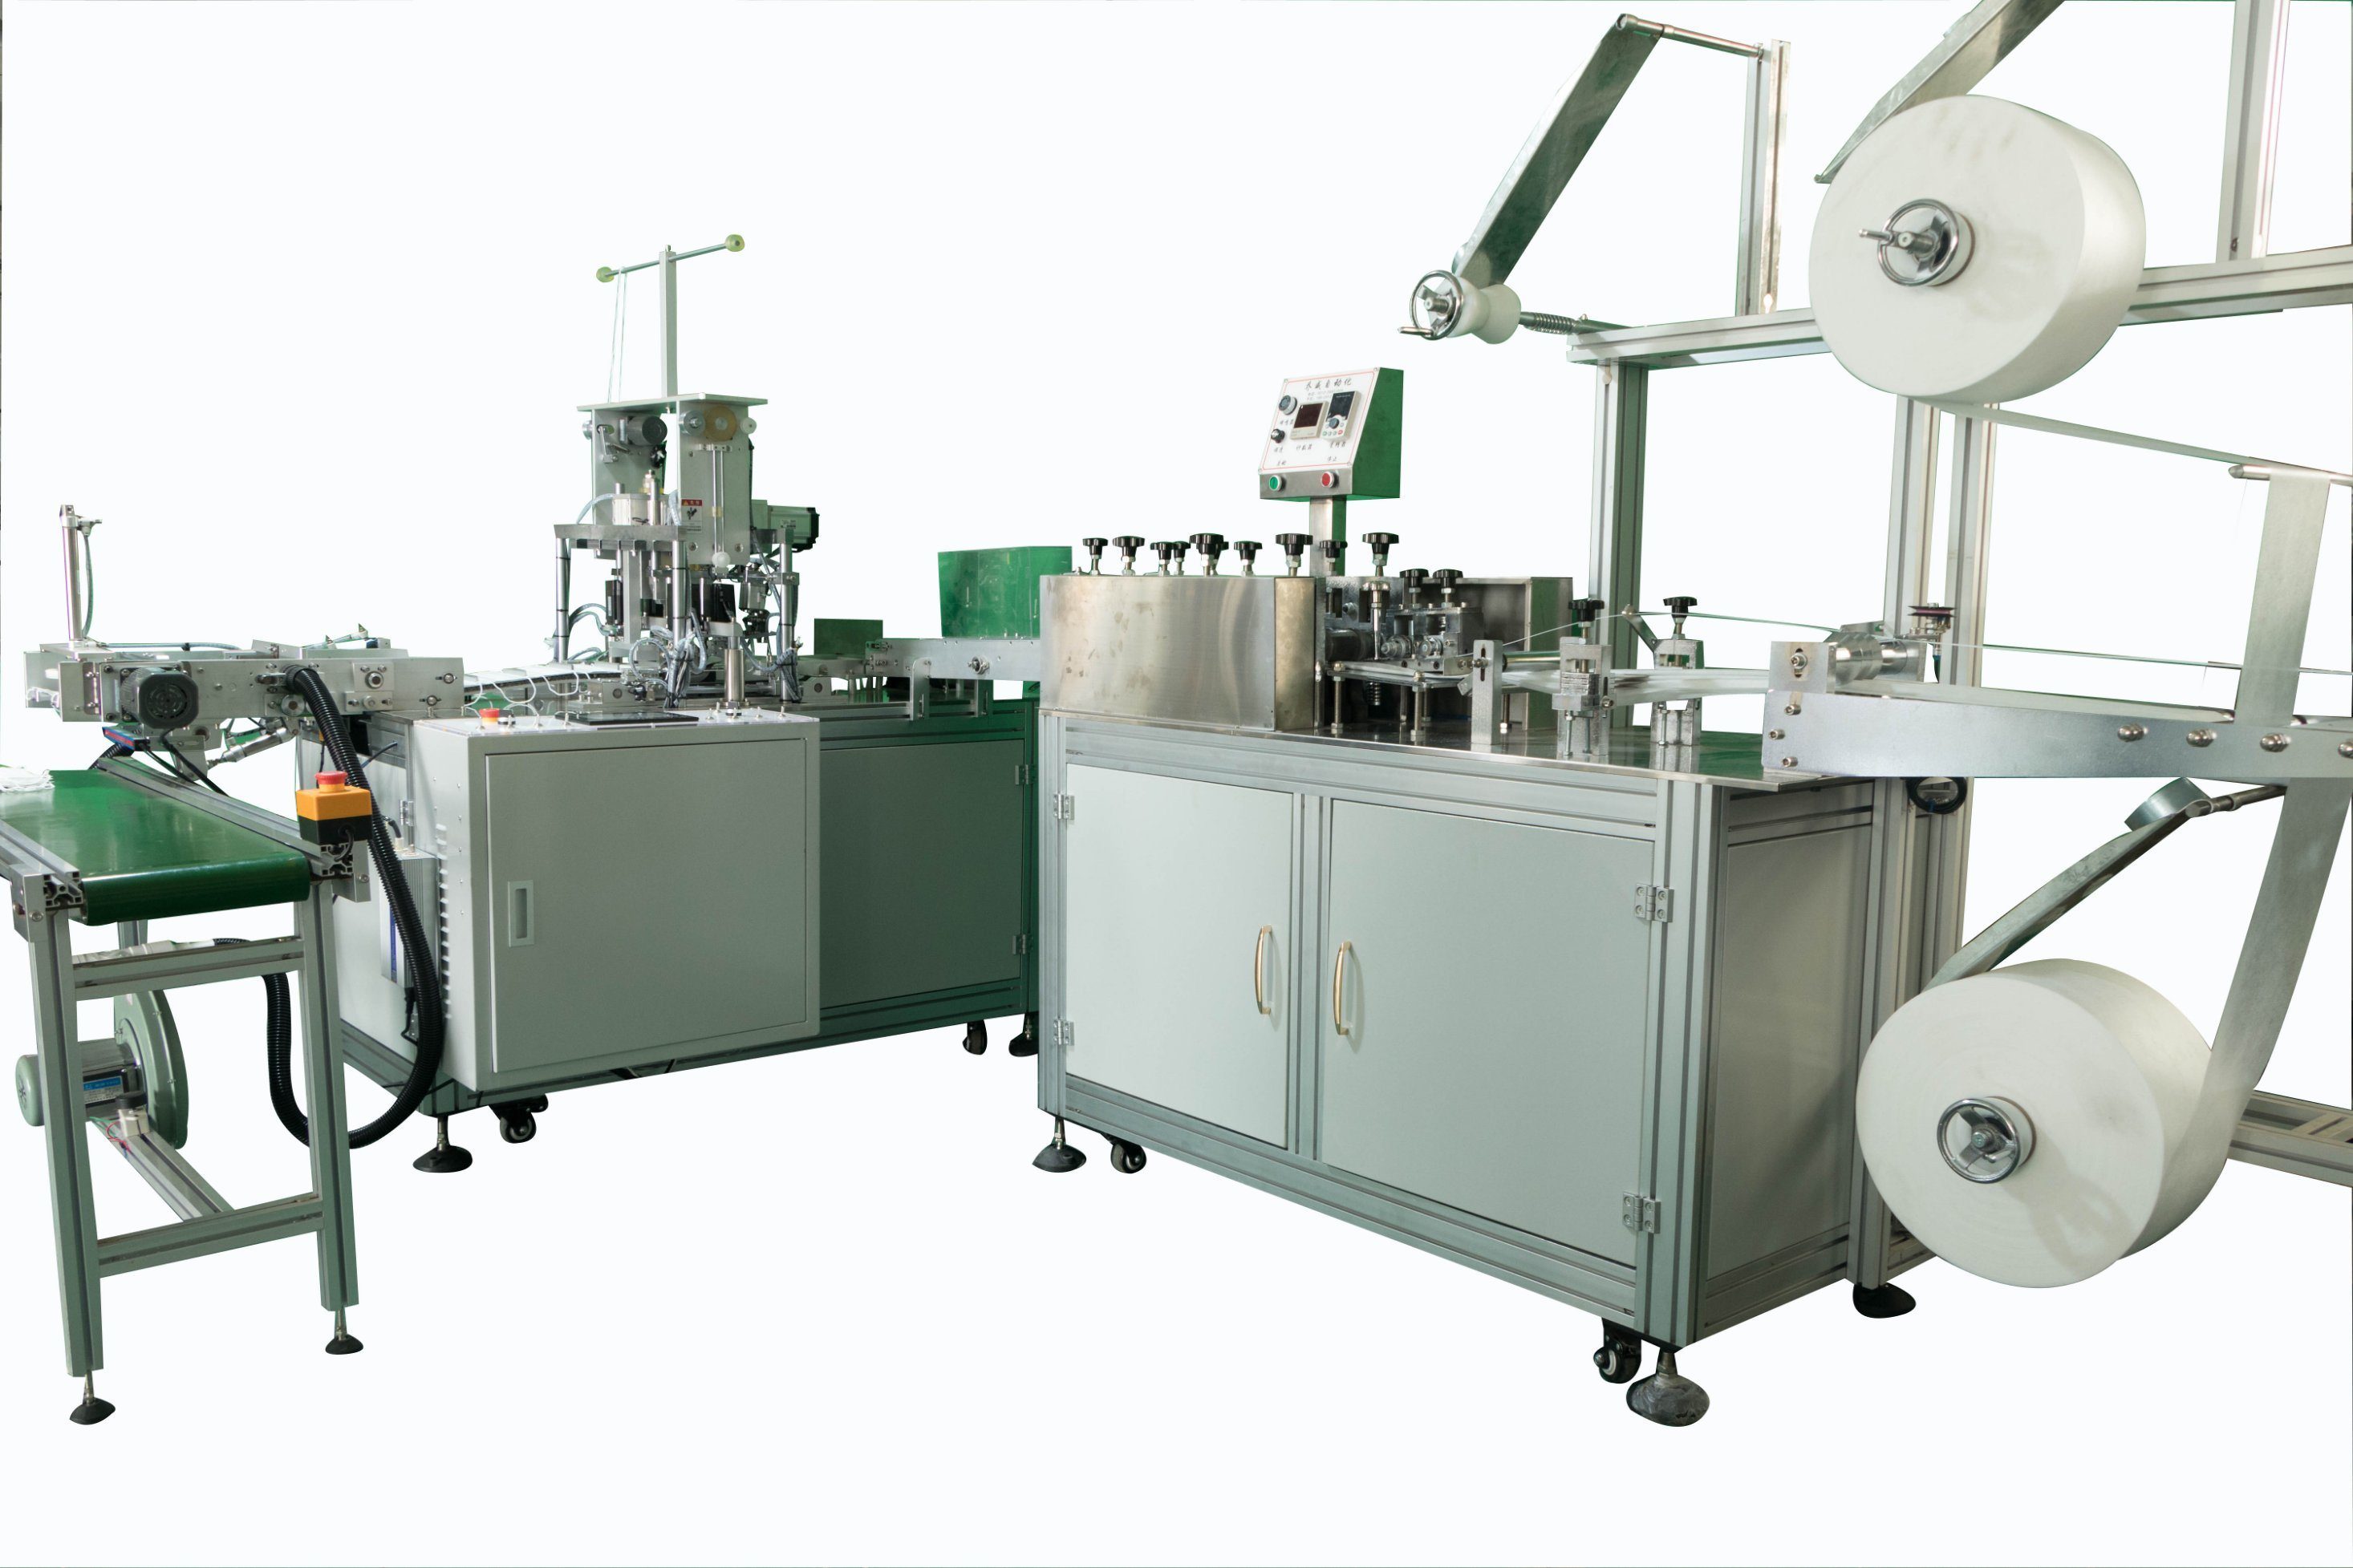 Nonwoven Cotton Waste Process Inner Ear-Loop Welding Medical Equipment Machine (Air Cylinder Type)